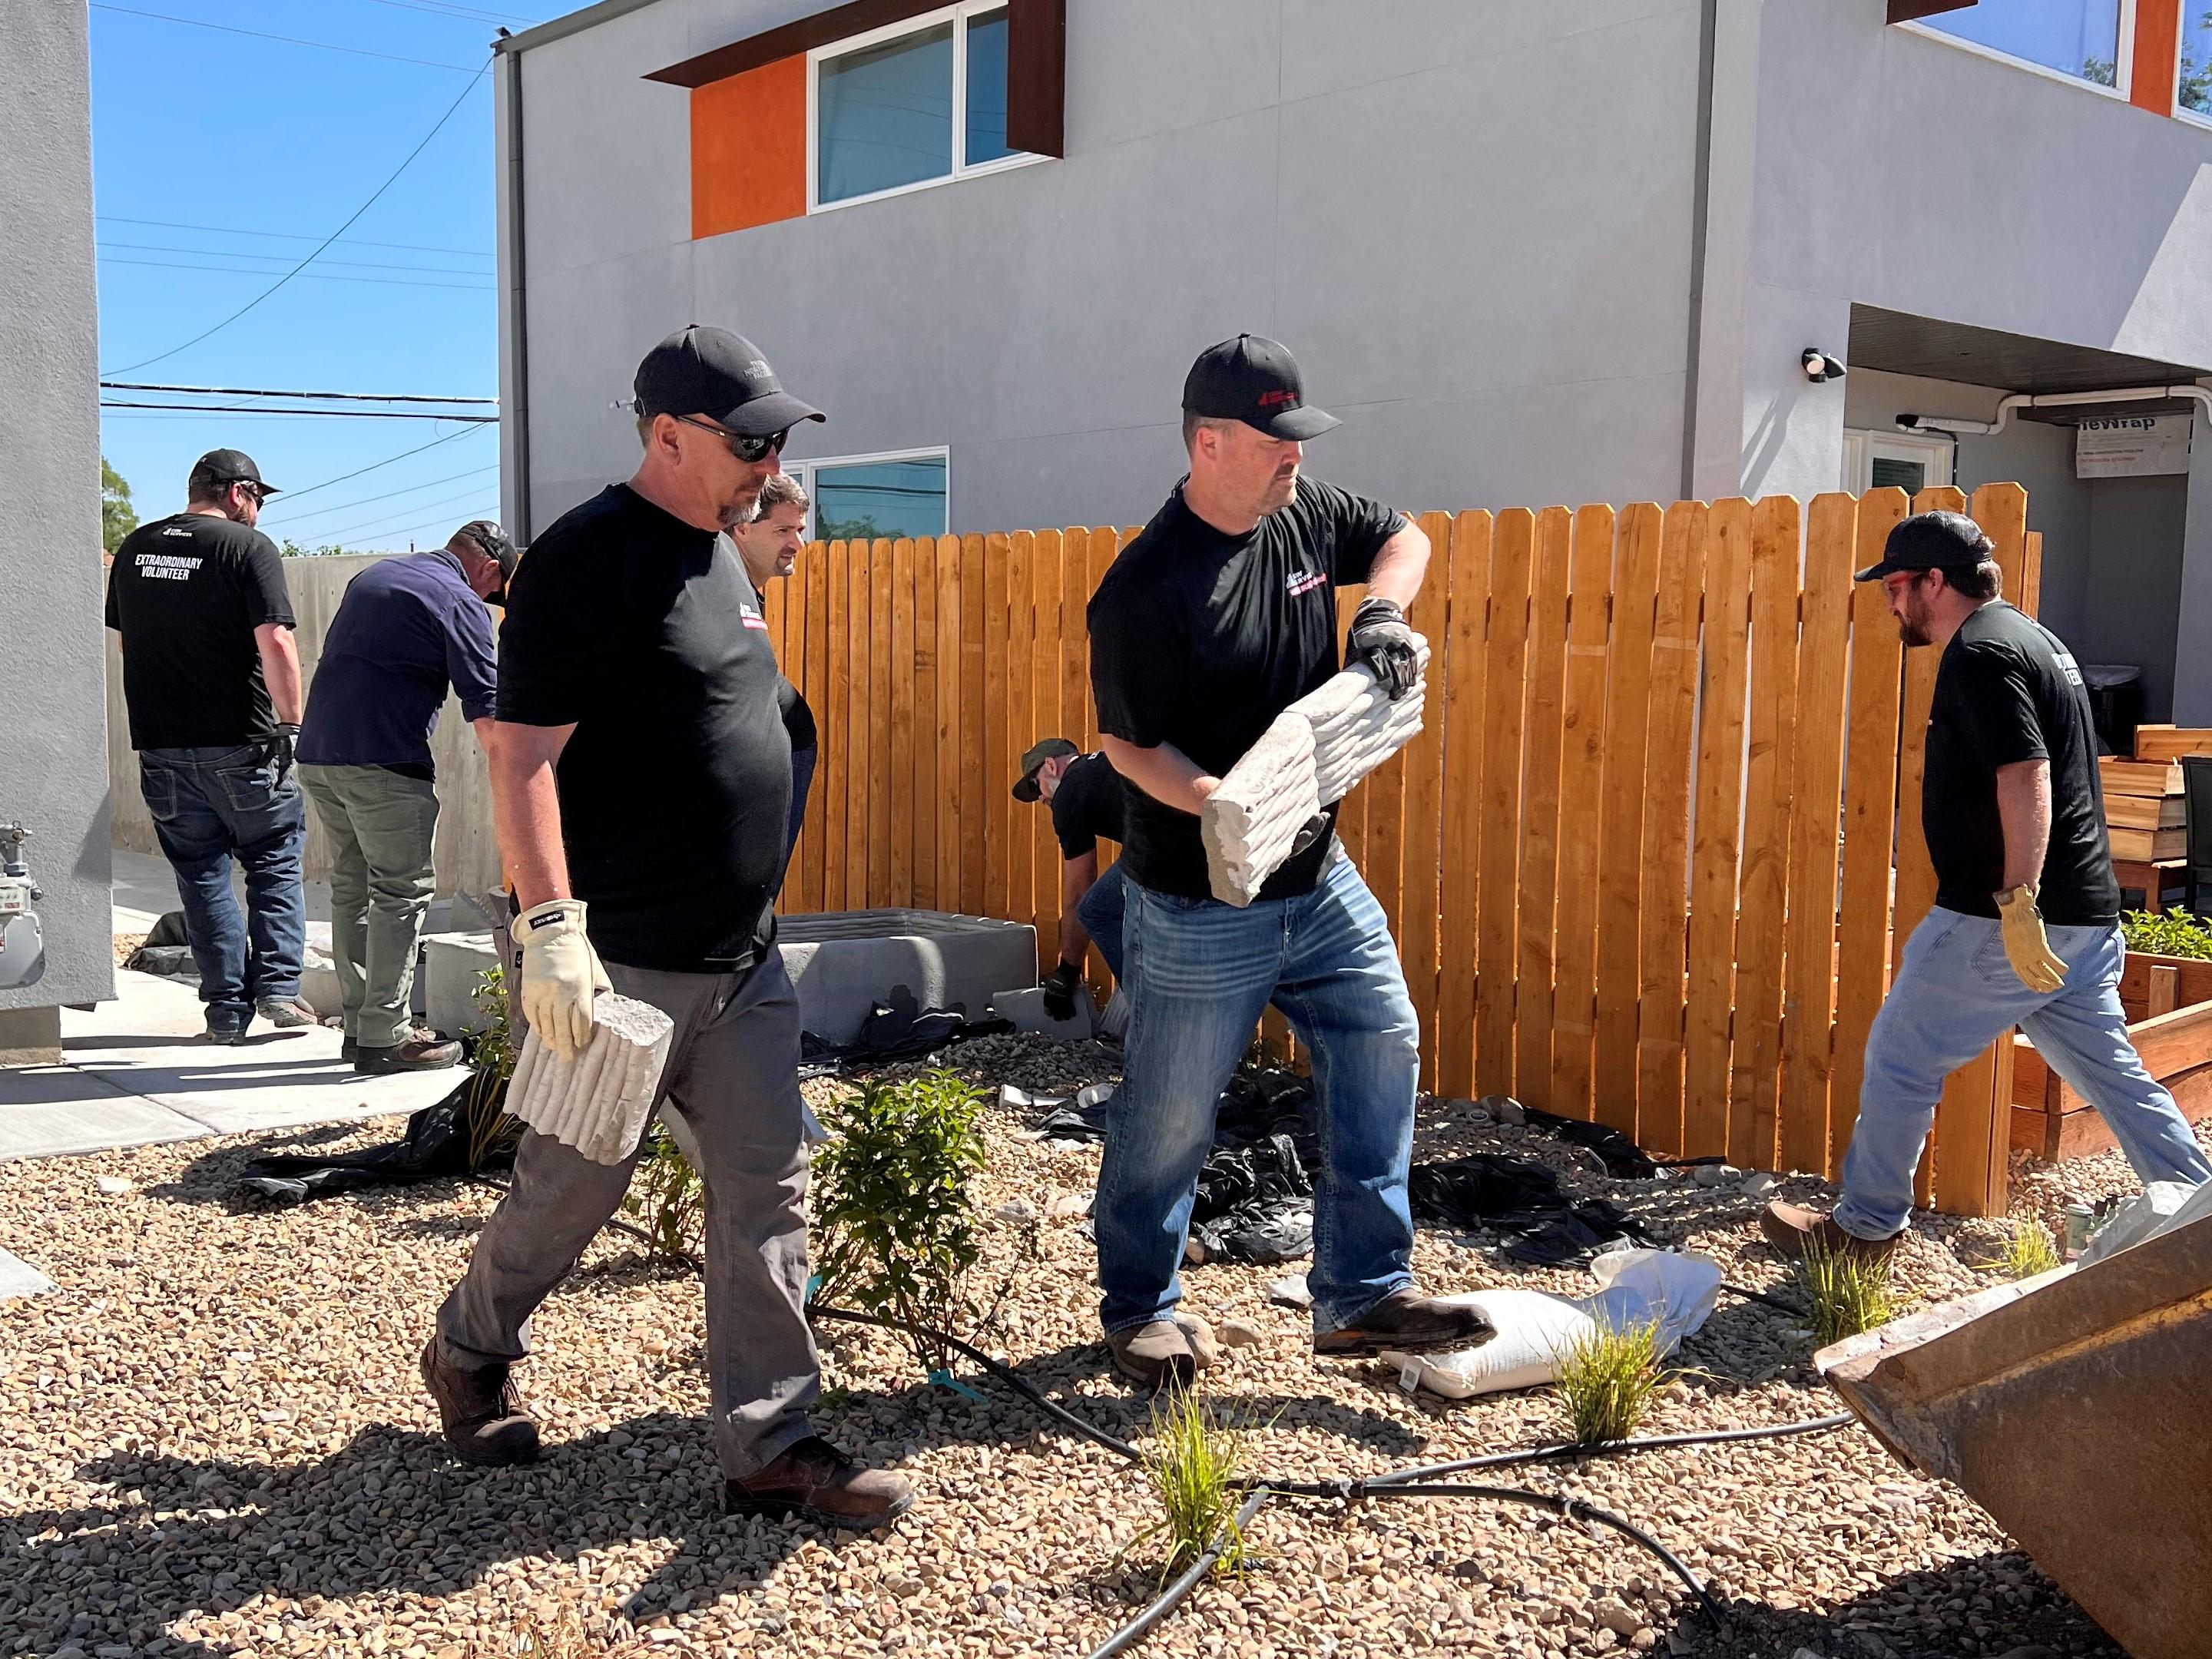 C&W Services volunteers installing landscaping materials at Habitat for Humanity site